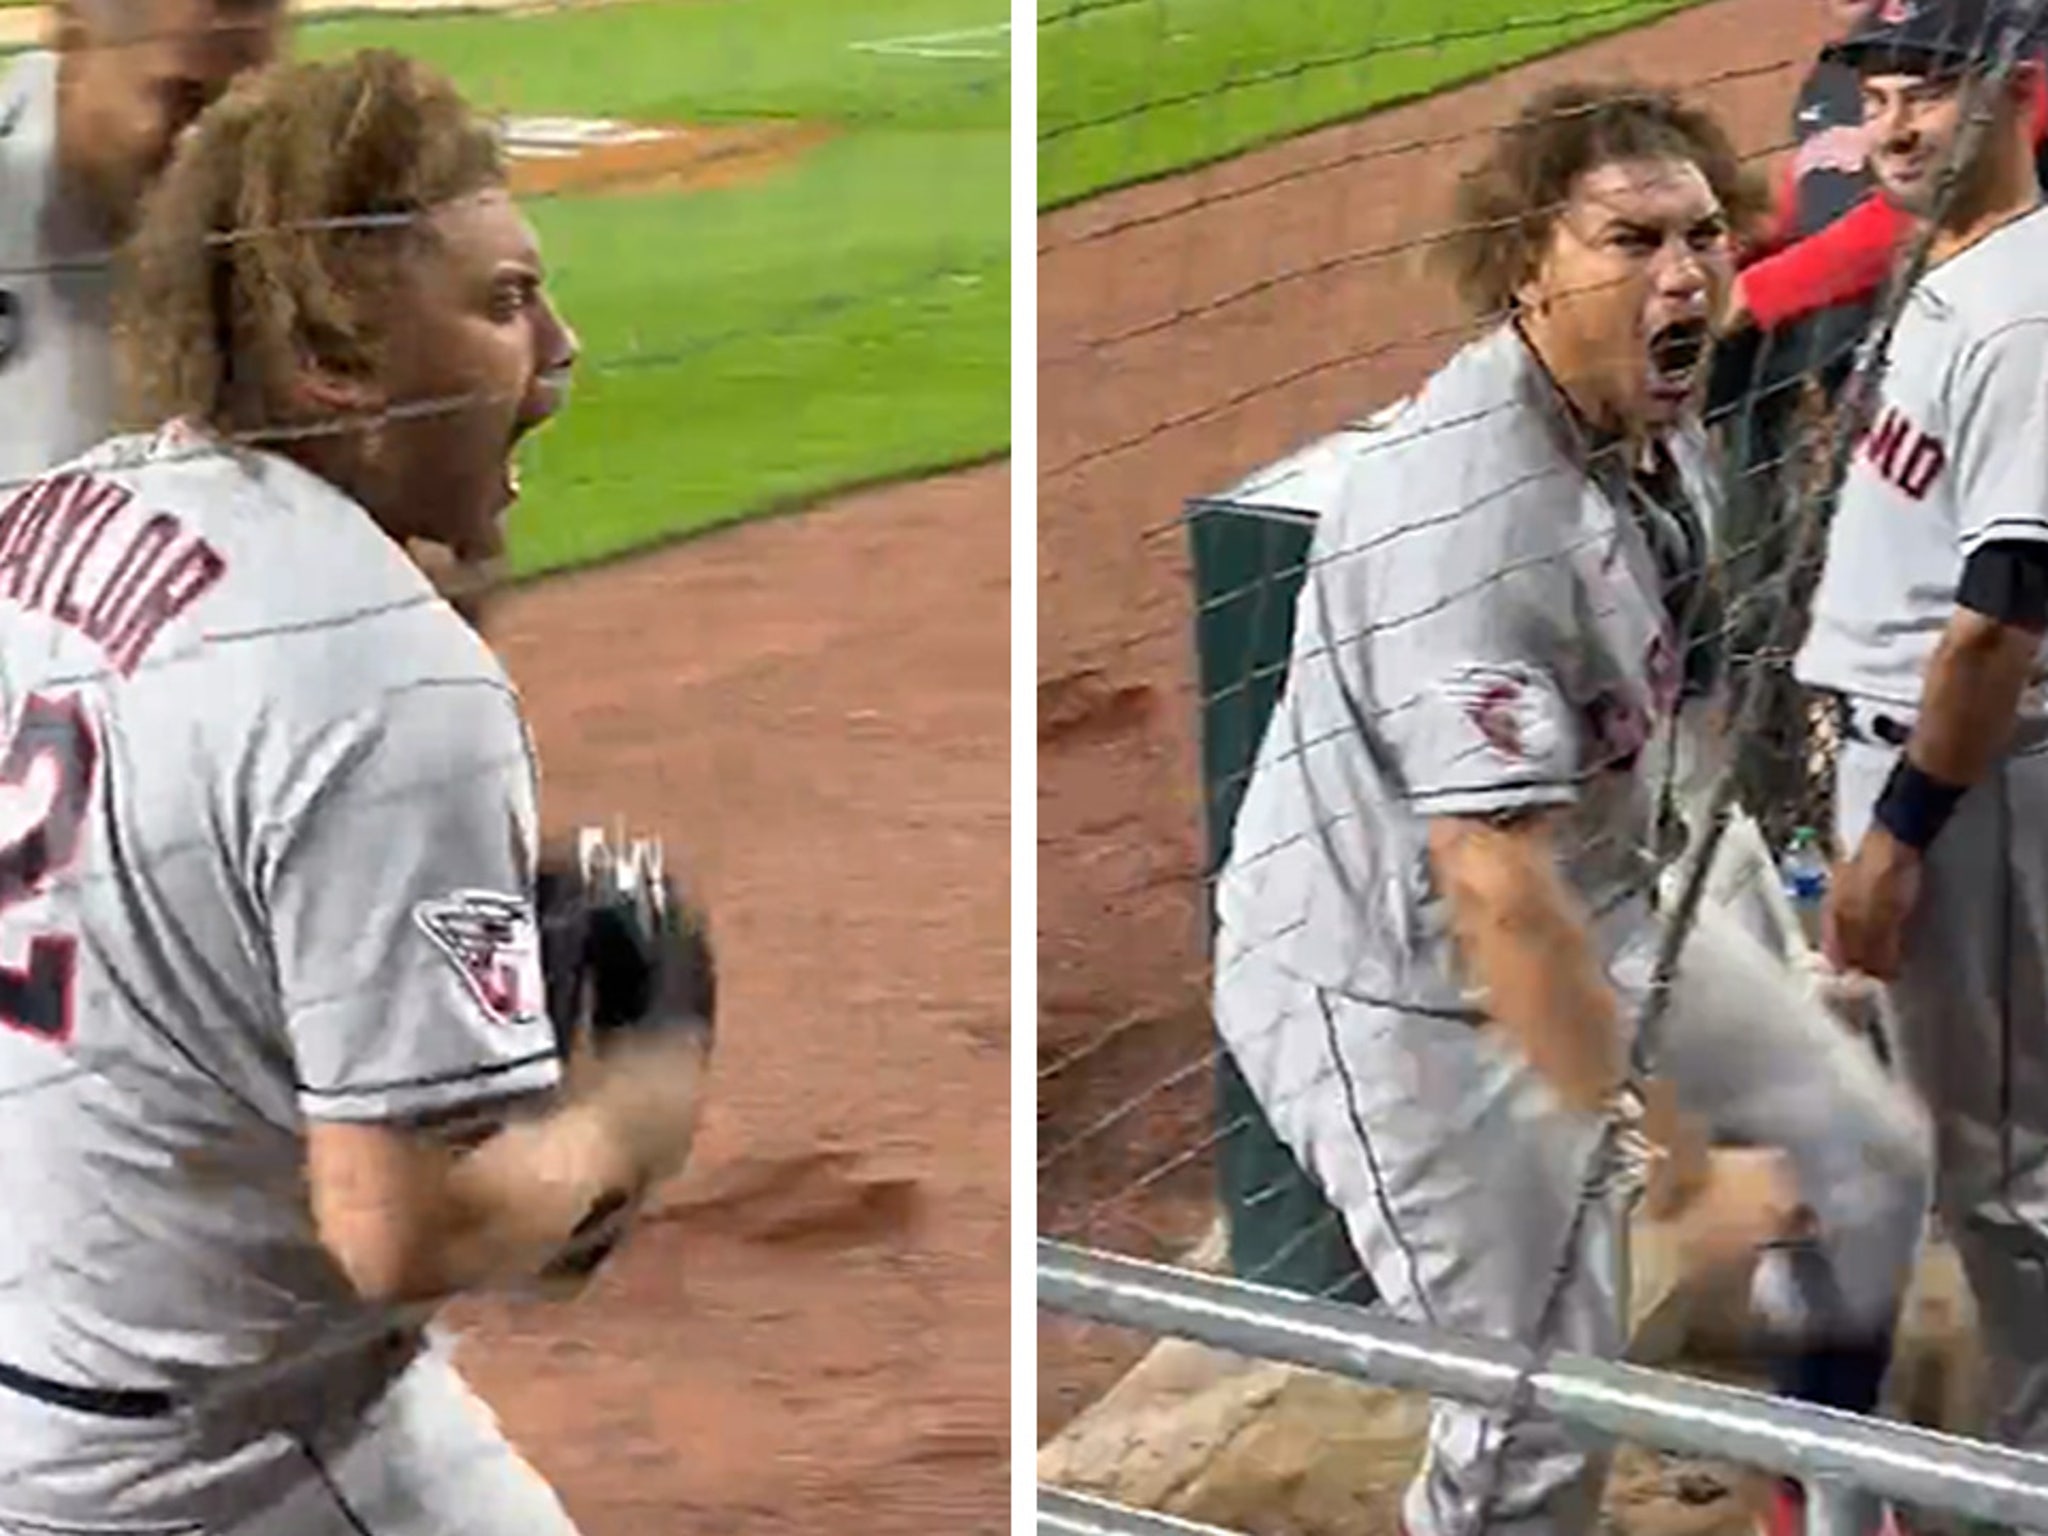 Watch Cleveland Guardians star Josh Naylor go absolutely nuts and toss  helmet in dugout after hitting home run